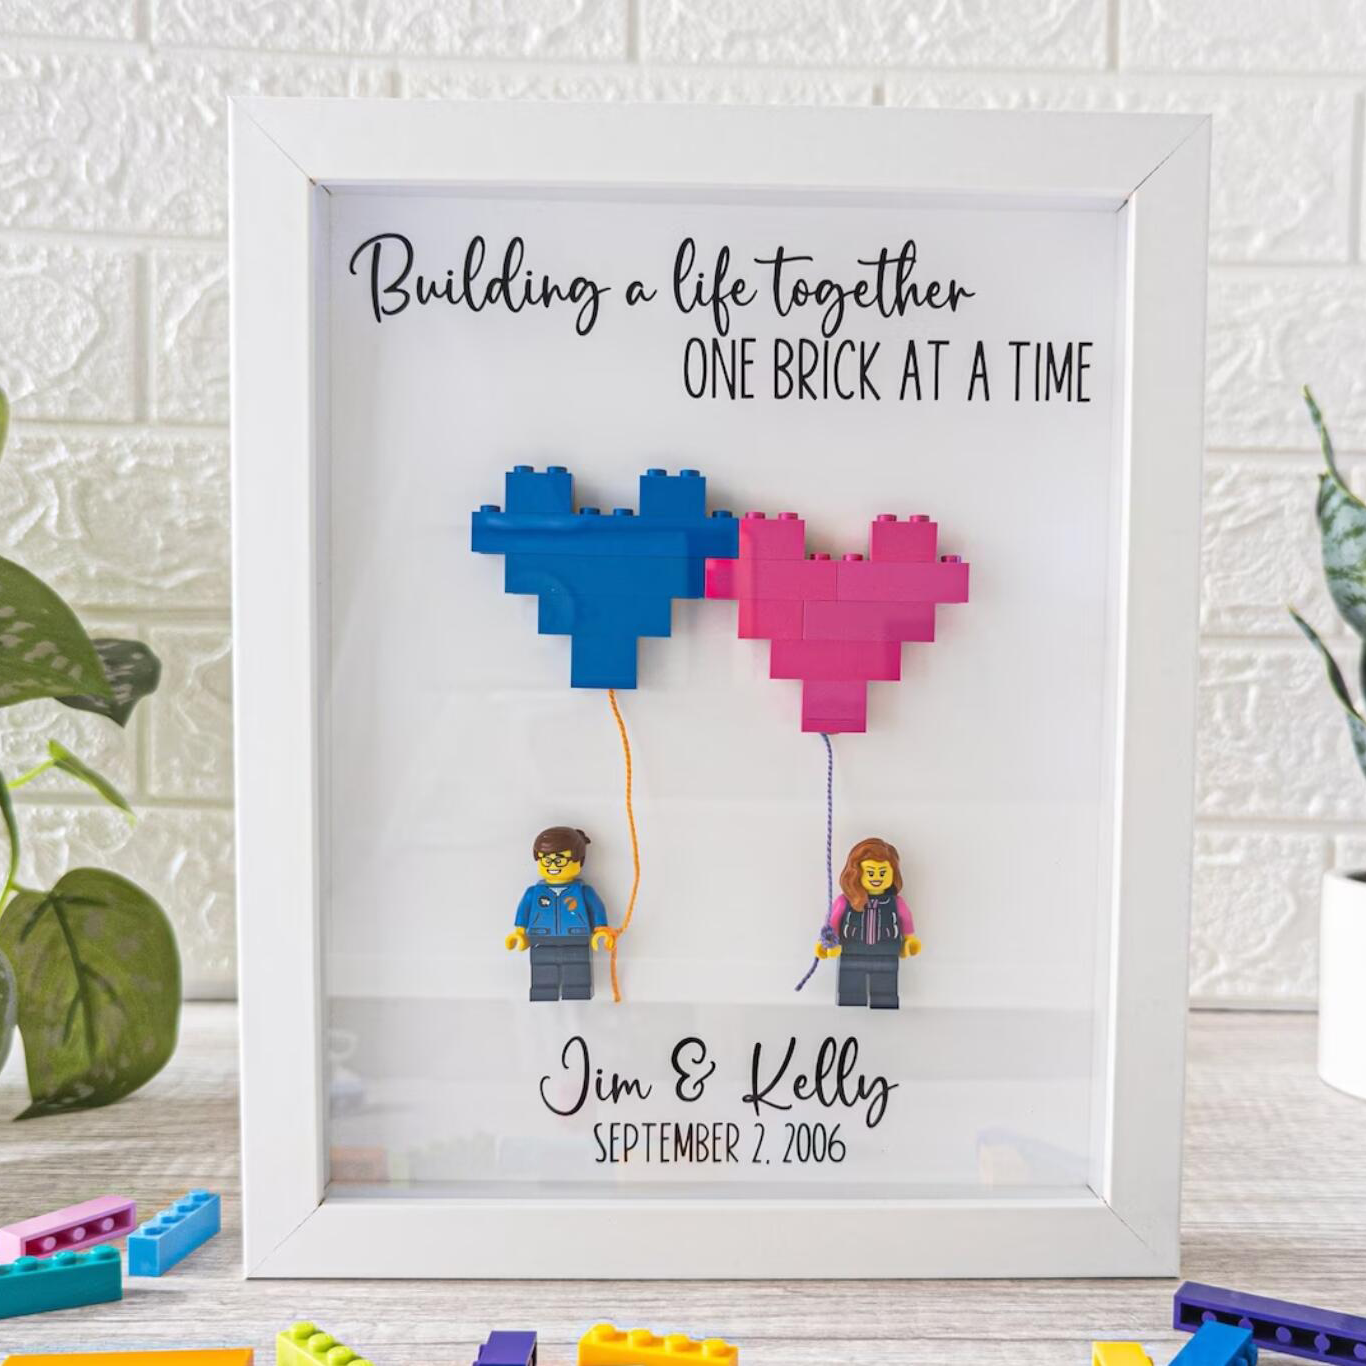 Personalized Mini Figures, Custom Couple Brick Figures Frame, Wedding Gift for Couple Unique Personalized, Unique Anniversary Gifts for Husband